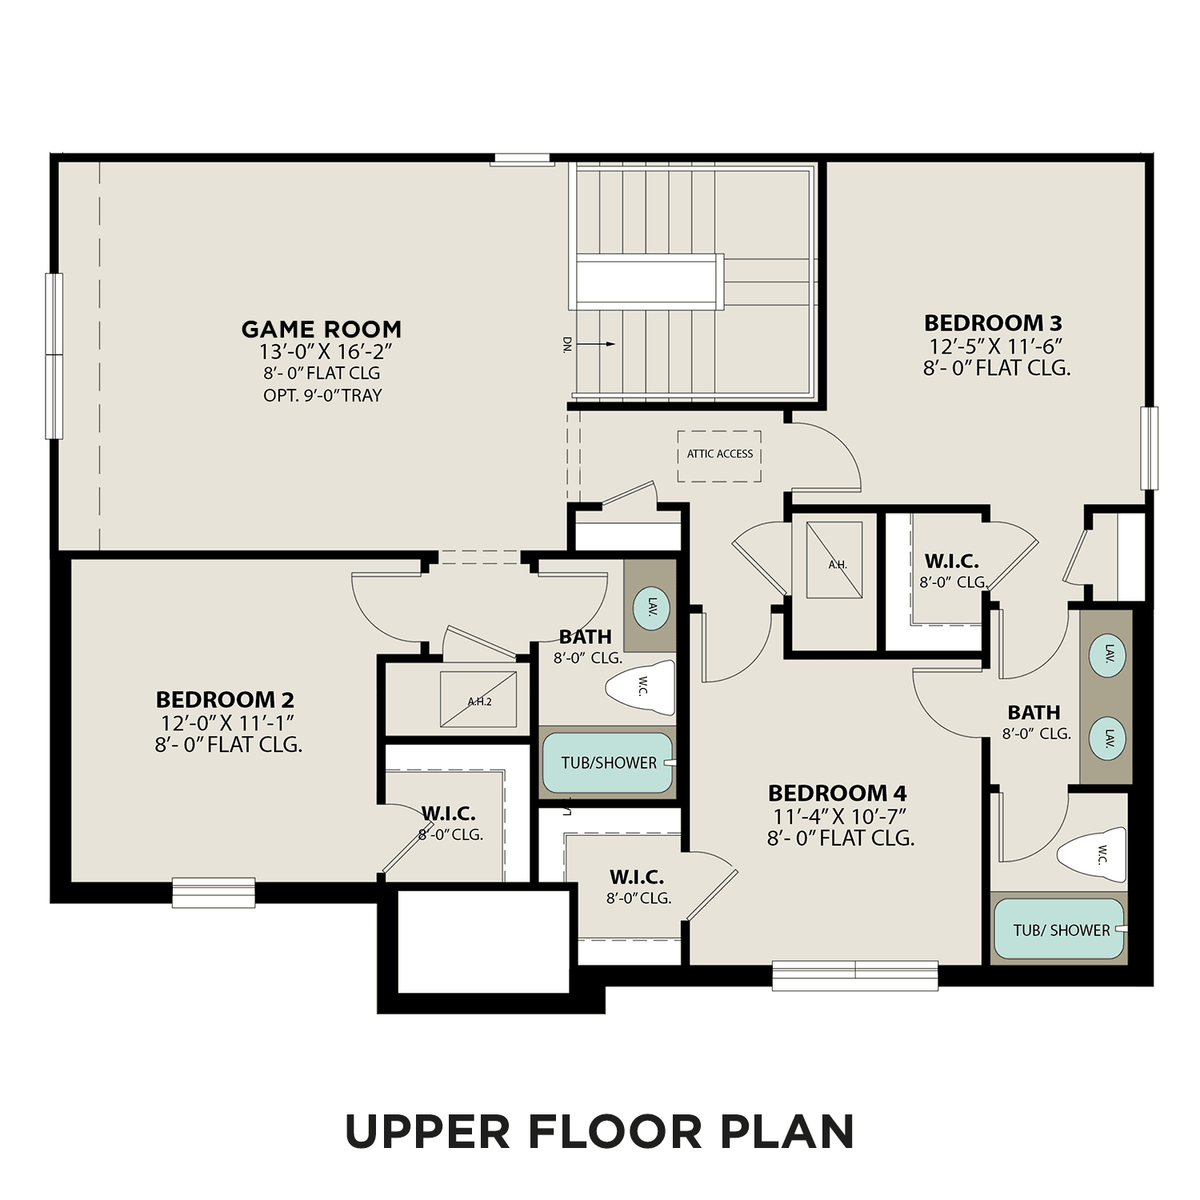 2 - The Sequoia A buildable floor plan layout in Davidson Homes' The Signature Series at Lago Mar community.